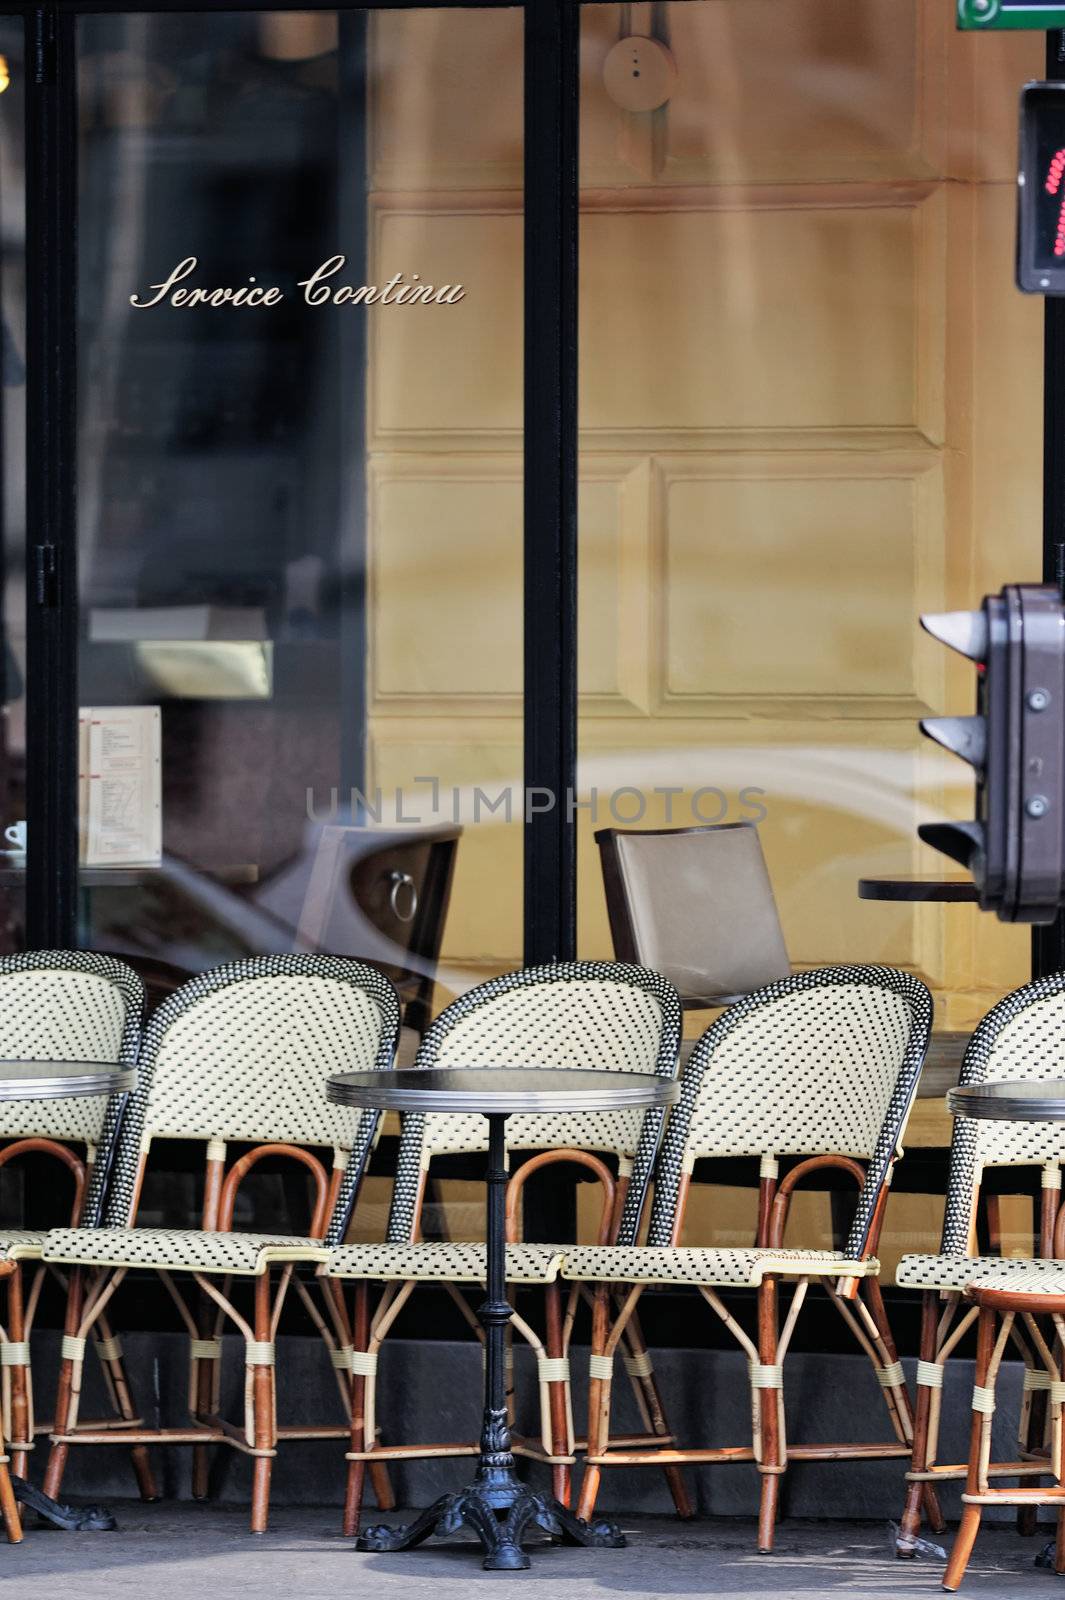 Wicker chairs in cafe in Paris. Photo with tilt-shift effect